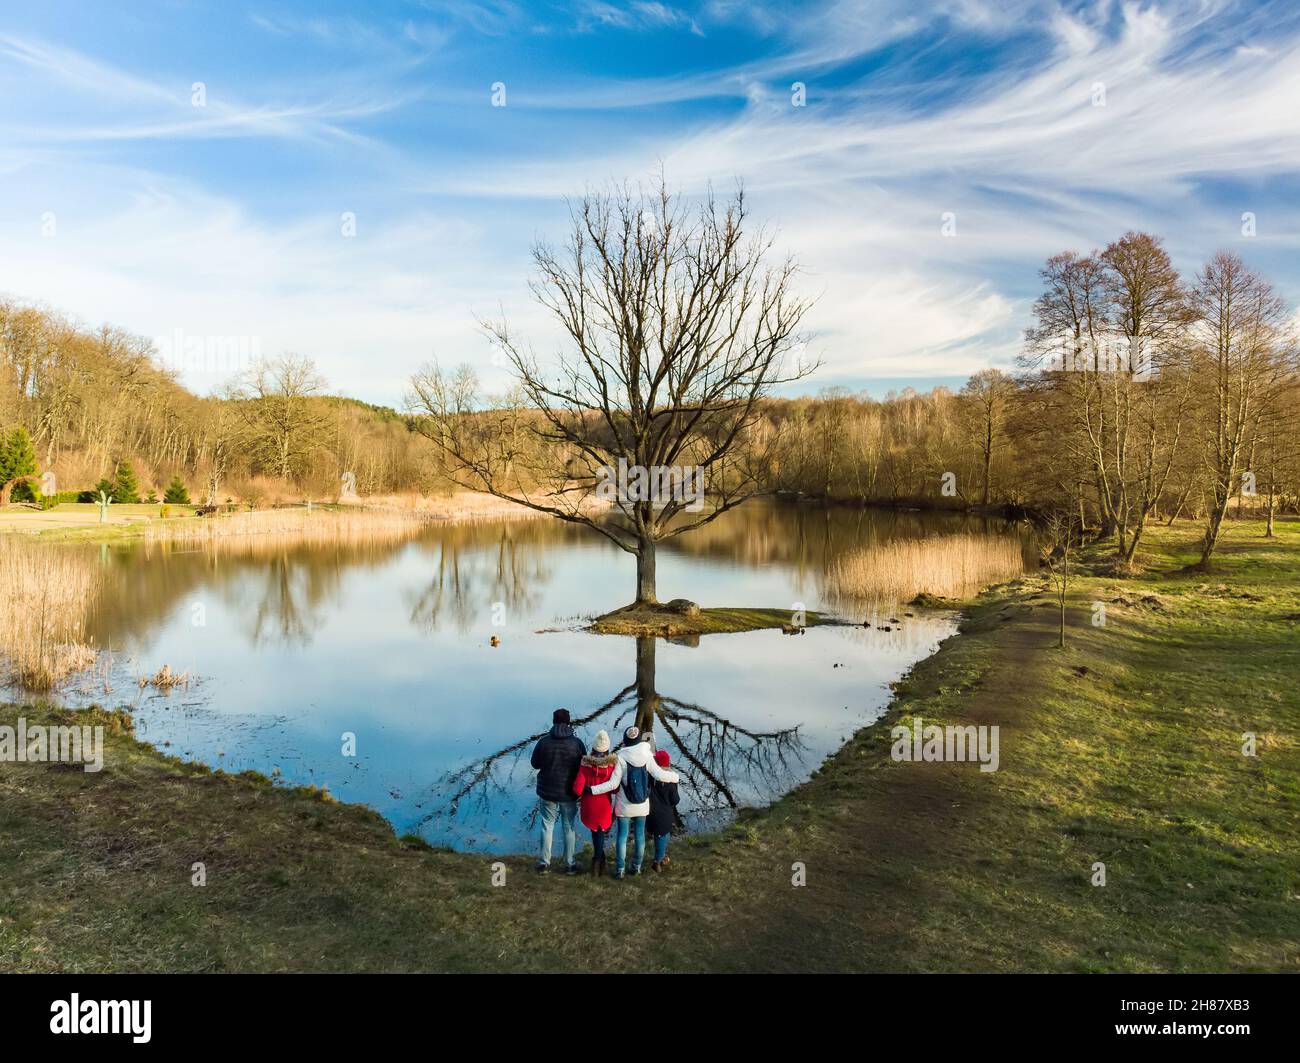 Aerial view of family of four having fun by a lake or pond on sunny spring day. Family having quality time together outdoors. Exploring nature with ki Stock Photo